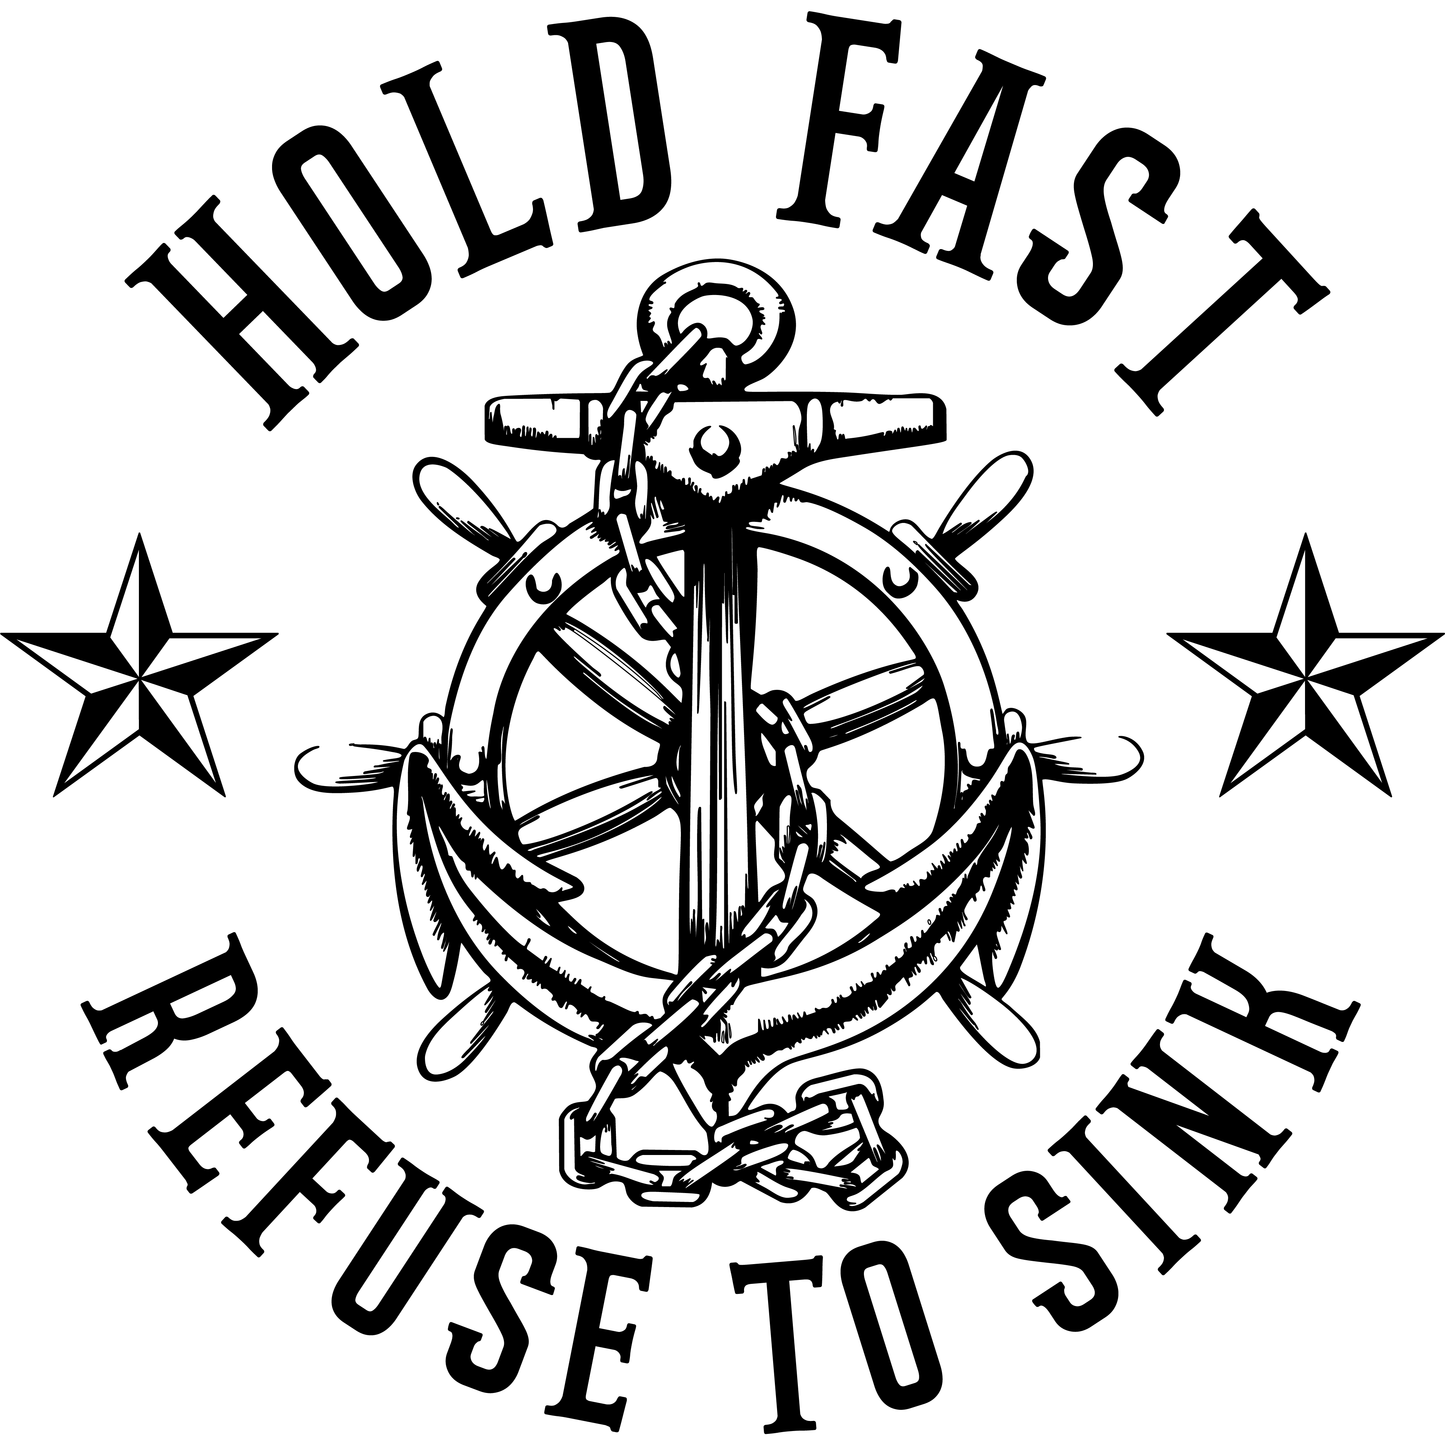 Hold Fast Refuse to Sink